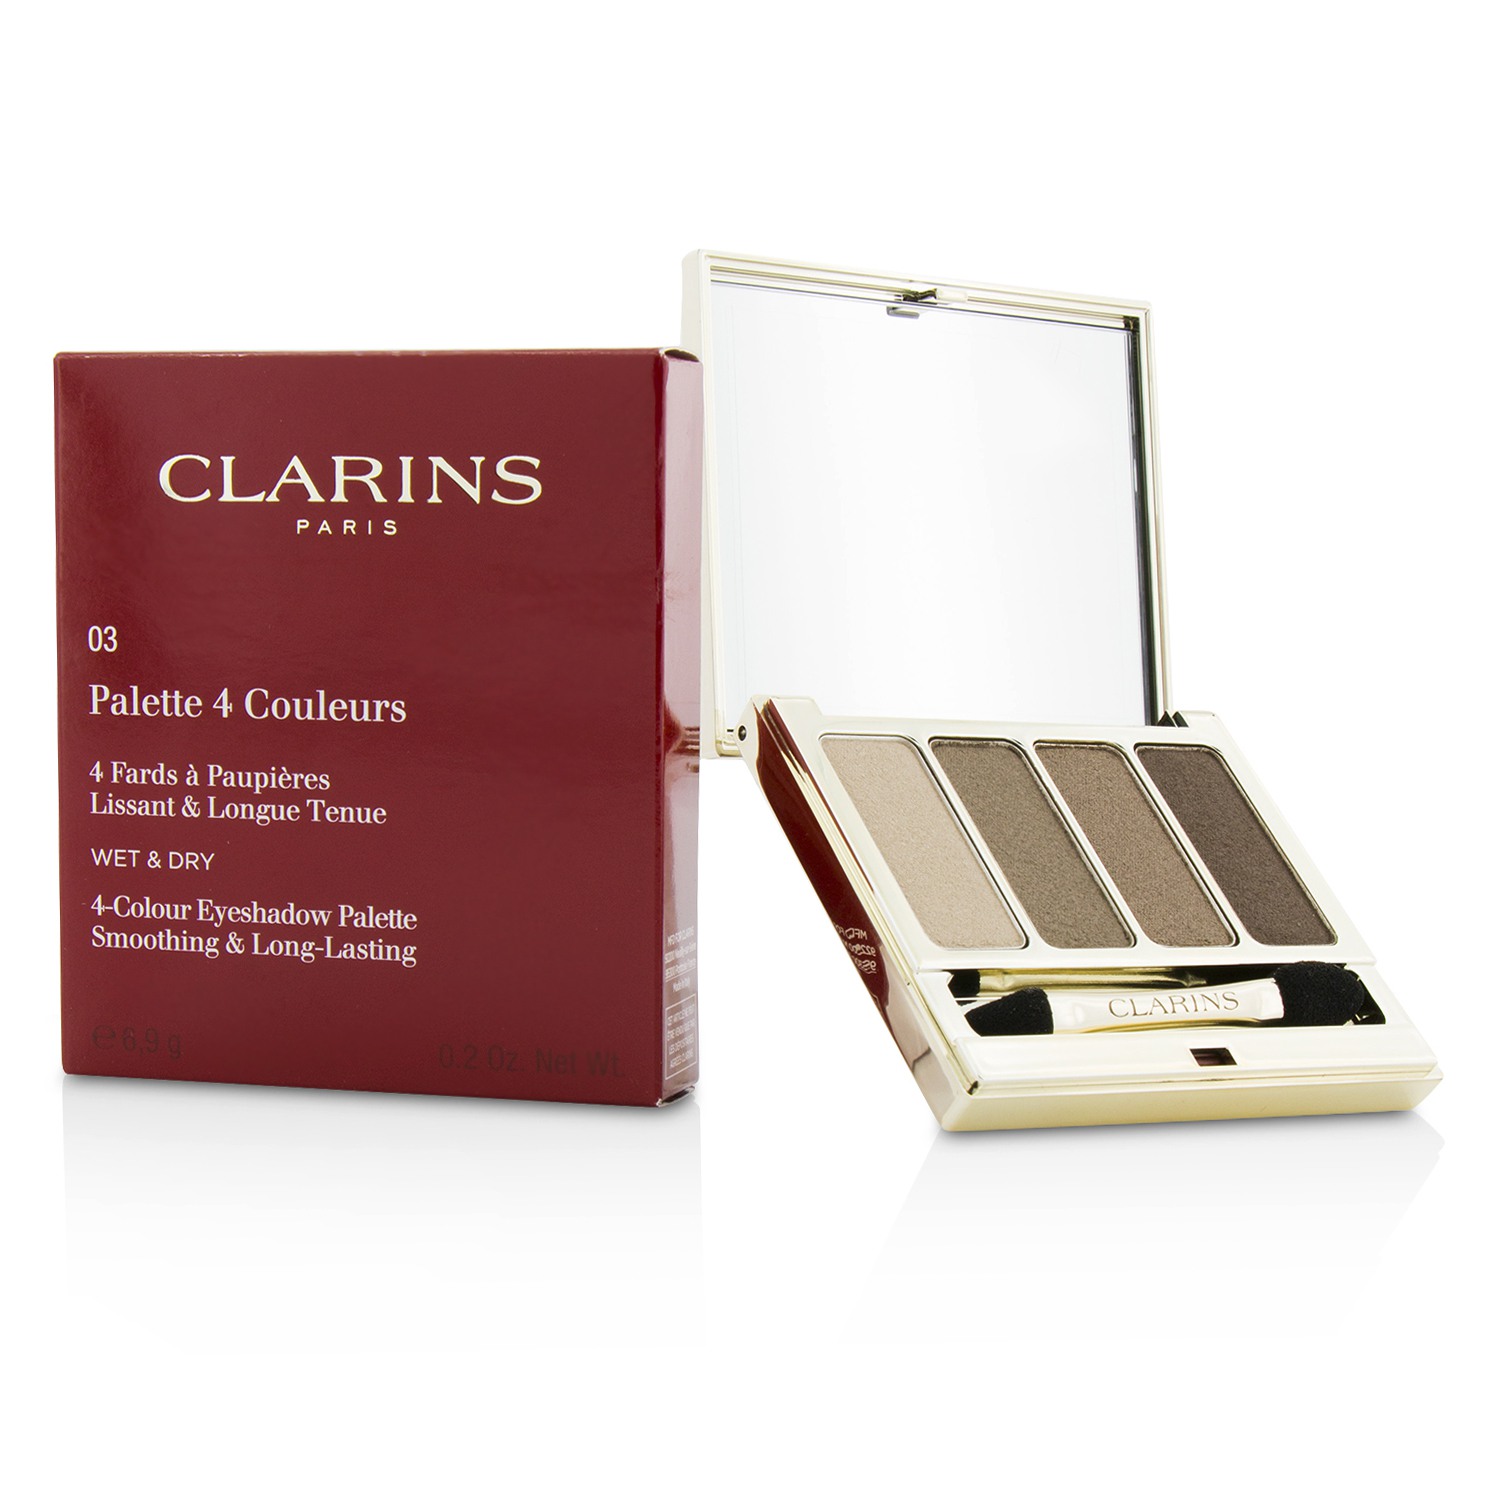 4 Colour Eyeshadow Palette (Smoothing & Long Lasting) - #03 Brown Clarins Image